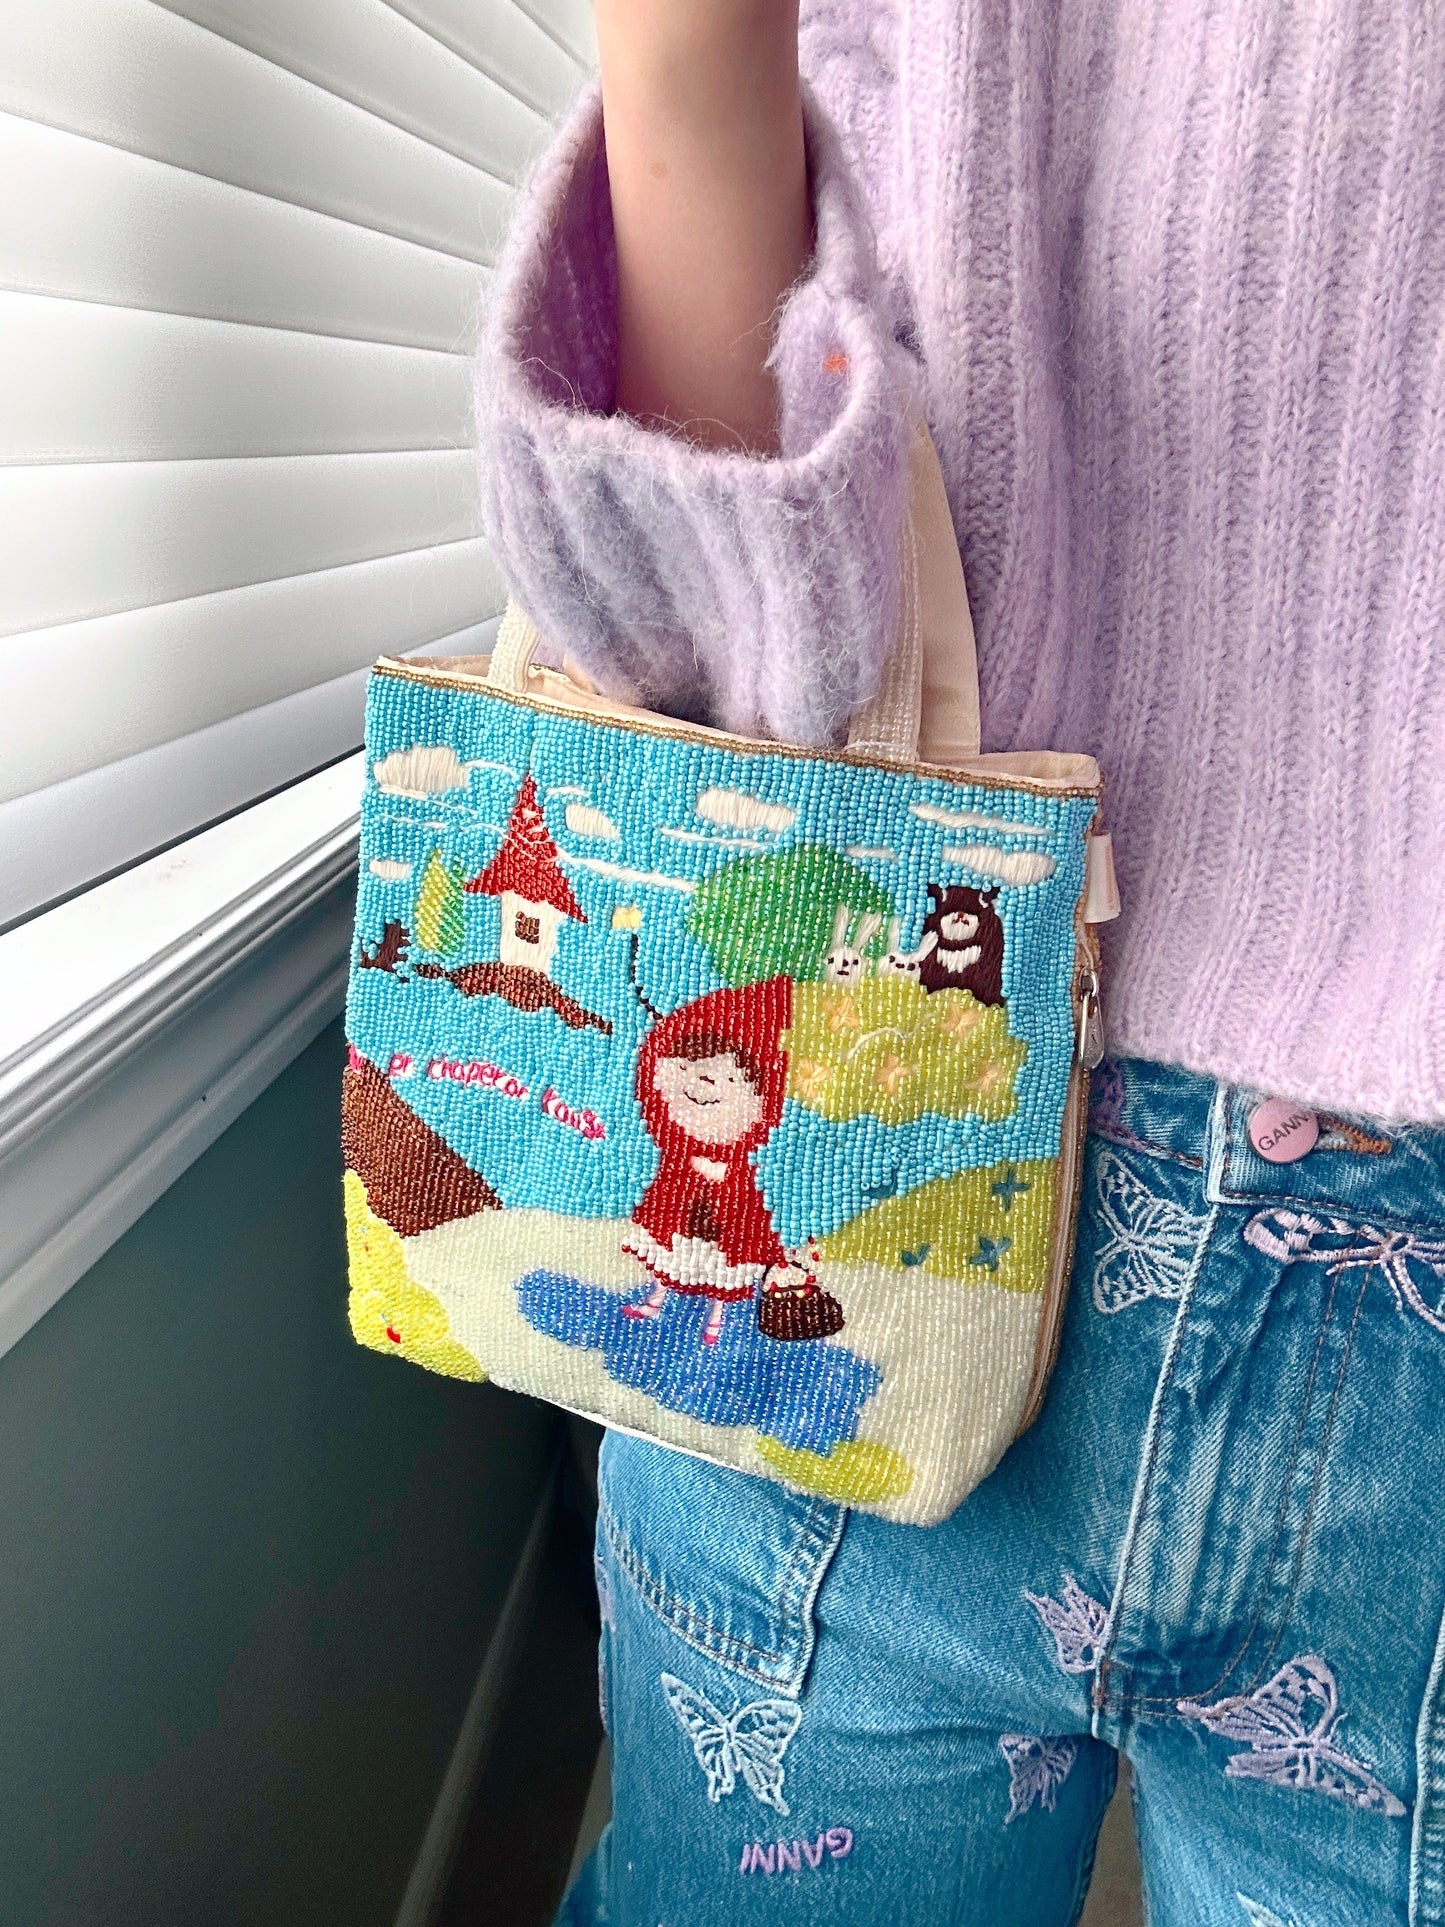 Little Red Riding Hood Beaded Small Tote